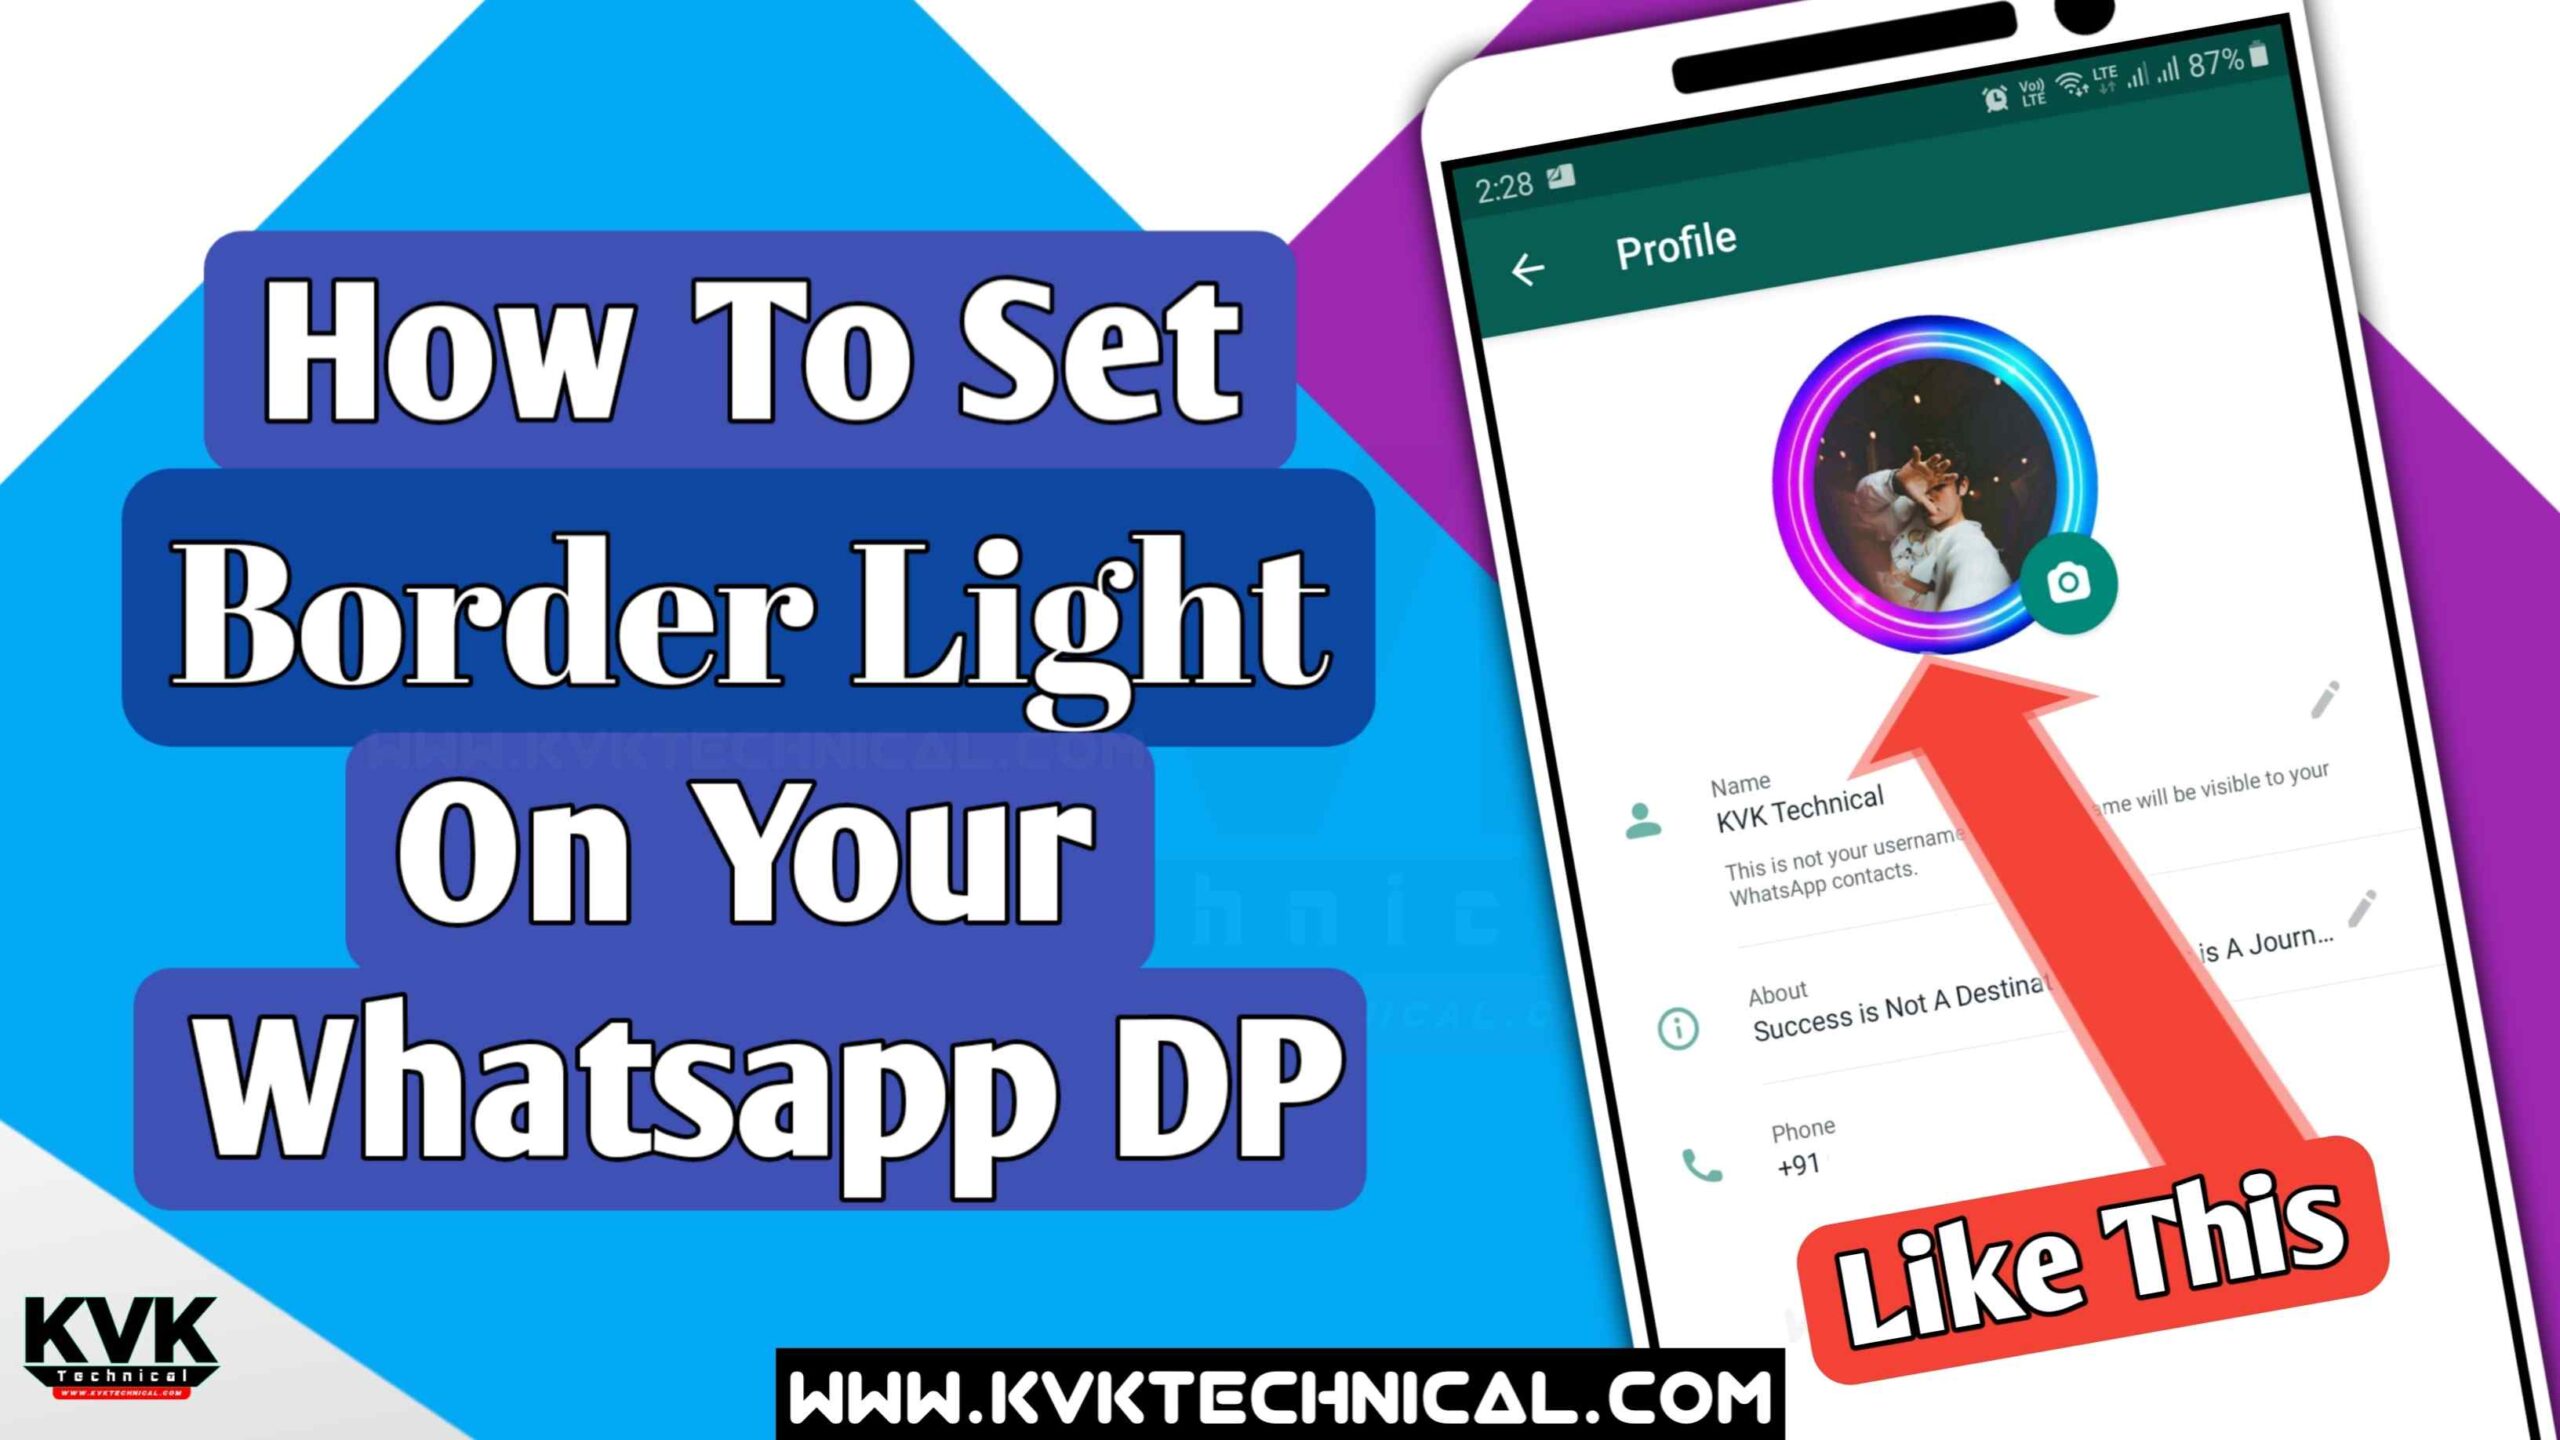 How to set border light on your whatsapp profile DP